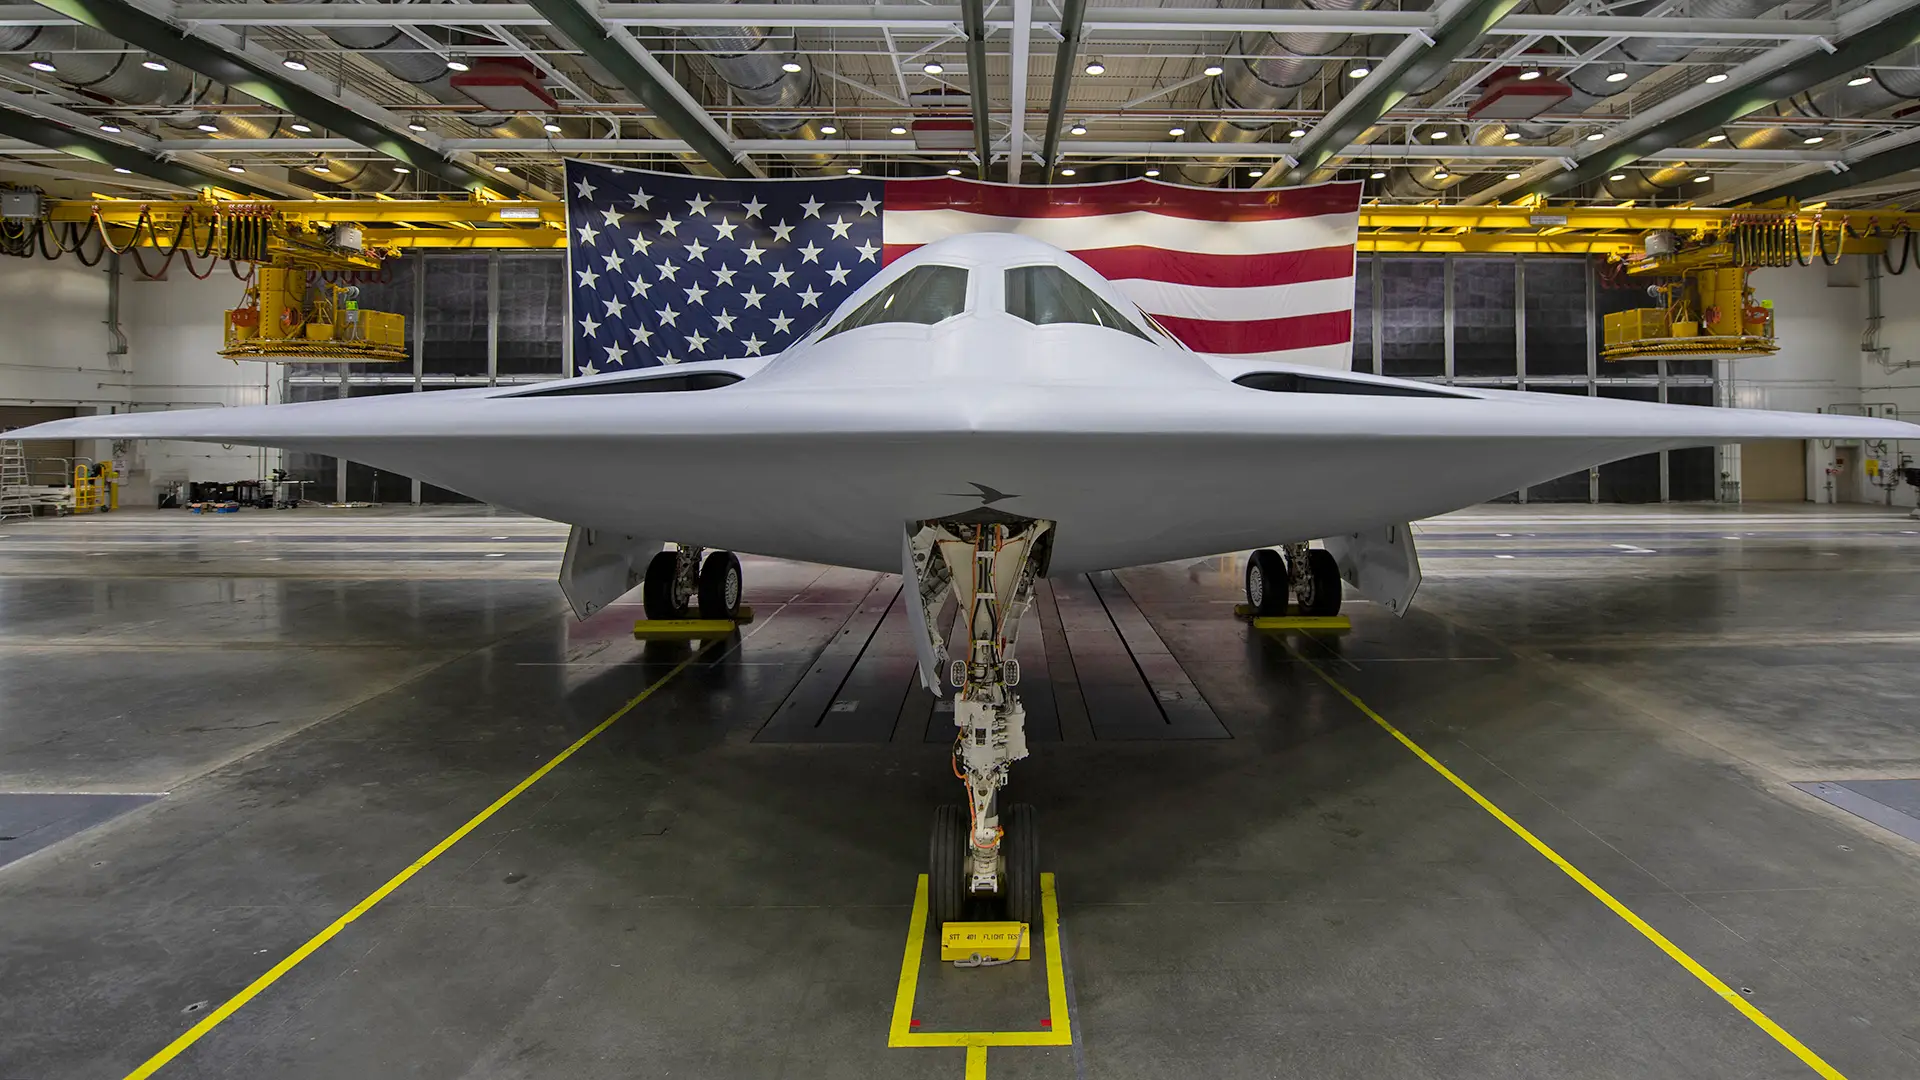 Cameras without zoom, distance keeping, no iPhones and smart watches - how the B-21 Raider nuclear bomber was unveiled